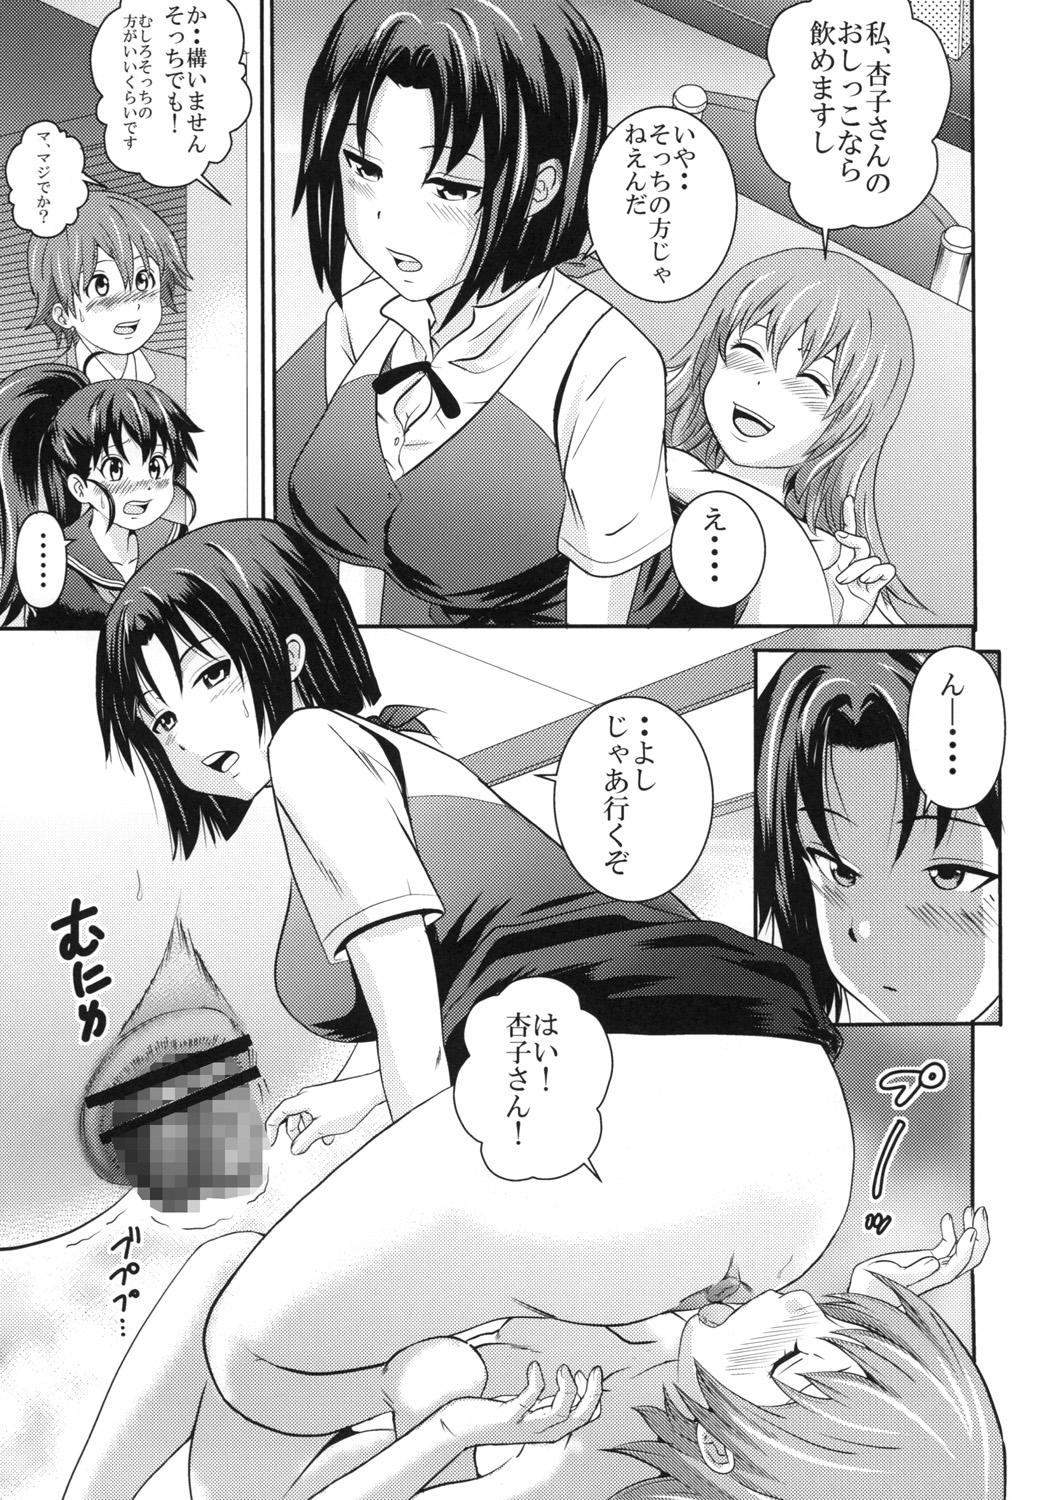 Asshole 杏子と八千代 UNCHING2 - Working Big Booty - Page 12